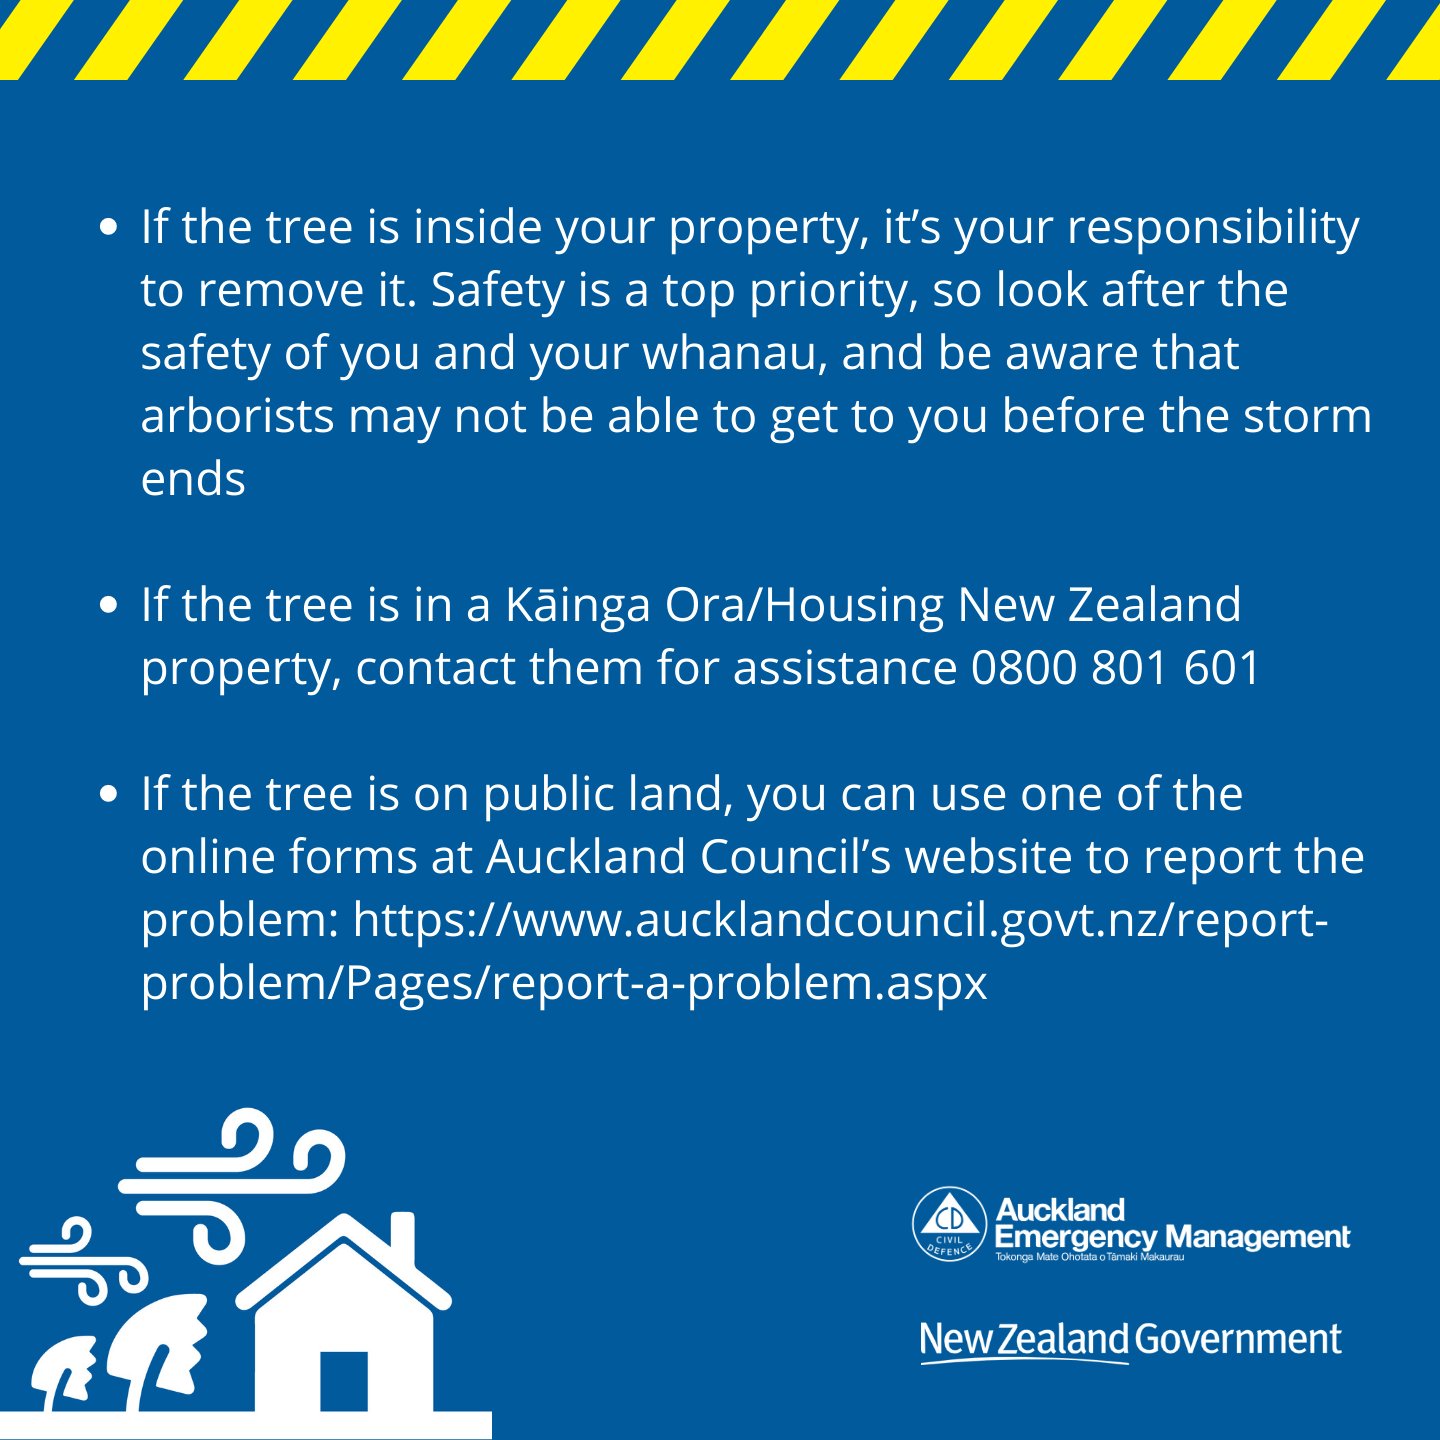 If the tree is inside your property, it’s your responsibility to remove it. Safety is a top priority, so look after the safety of you and your whanau, and be aware that arborists may not be able to get to you before the storm ends  If the tree is in a Kāinga Ora/Housing New Zealand property, contact them for assistance 0800 801 601  If the tree is on public land, you can use one of the online forms at Auckland Council’s website to report the problem: https://www.aucklandcouncil.govt.nz/report-problem/Pages/report-a-problem.aspx